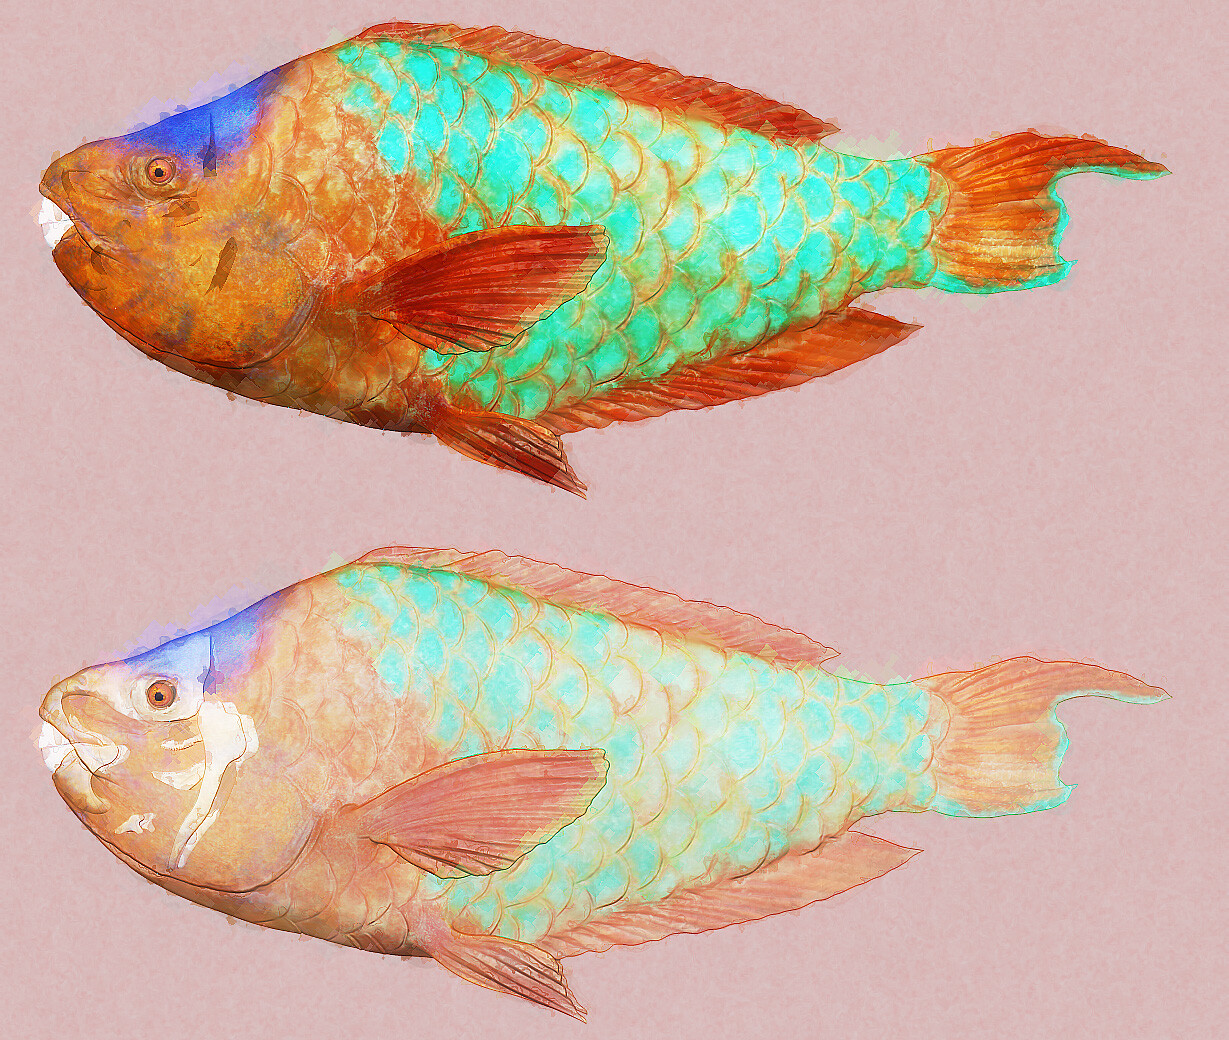 Rainbow Parrot fish. The skeletal structure is visible through the semi transparent body on the lower image. 